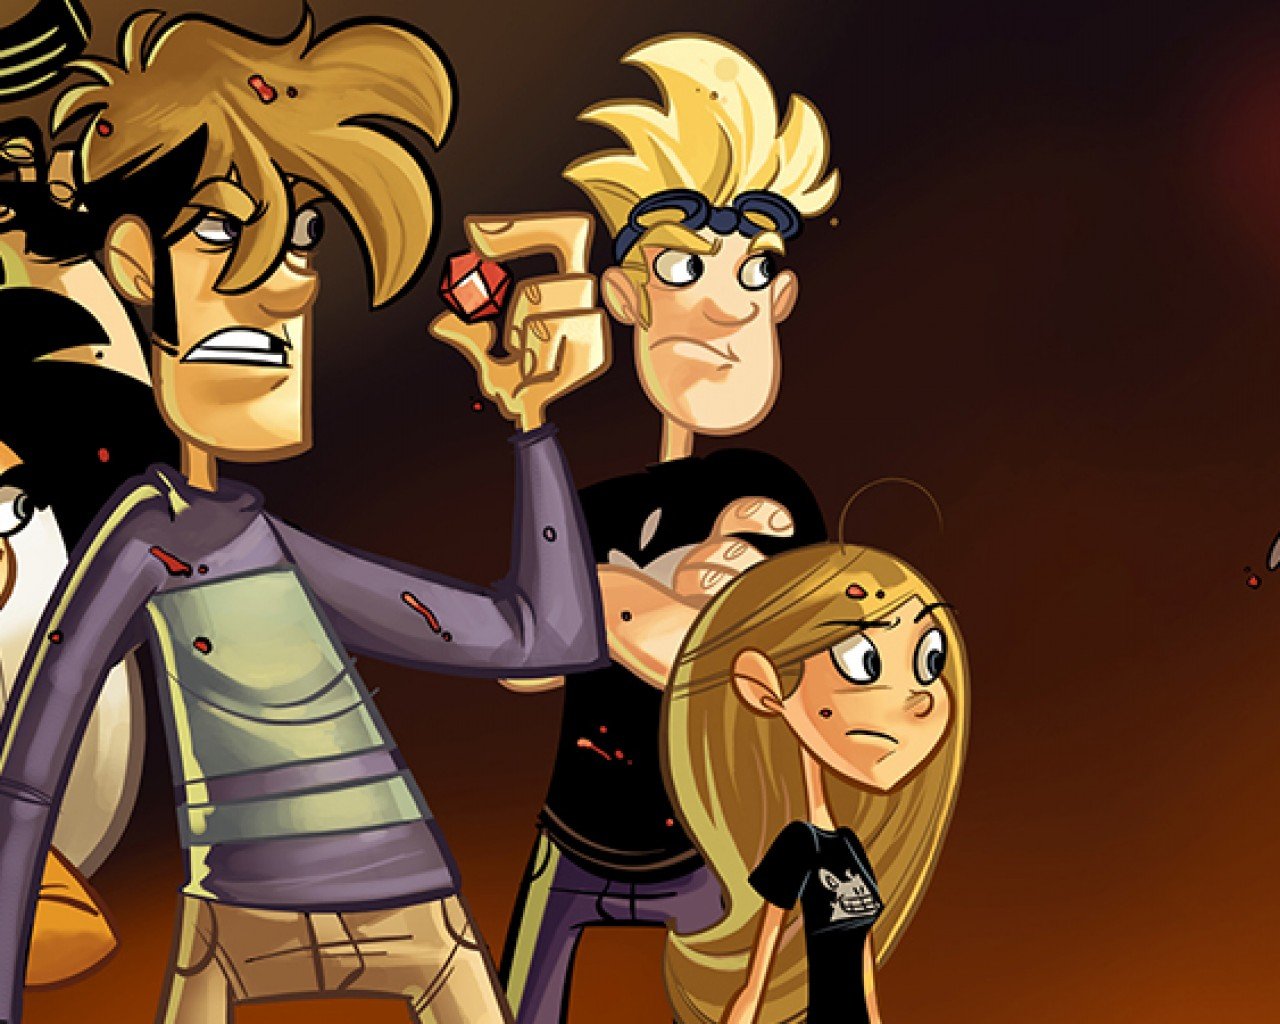 Poster Image for Penny Arcade